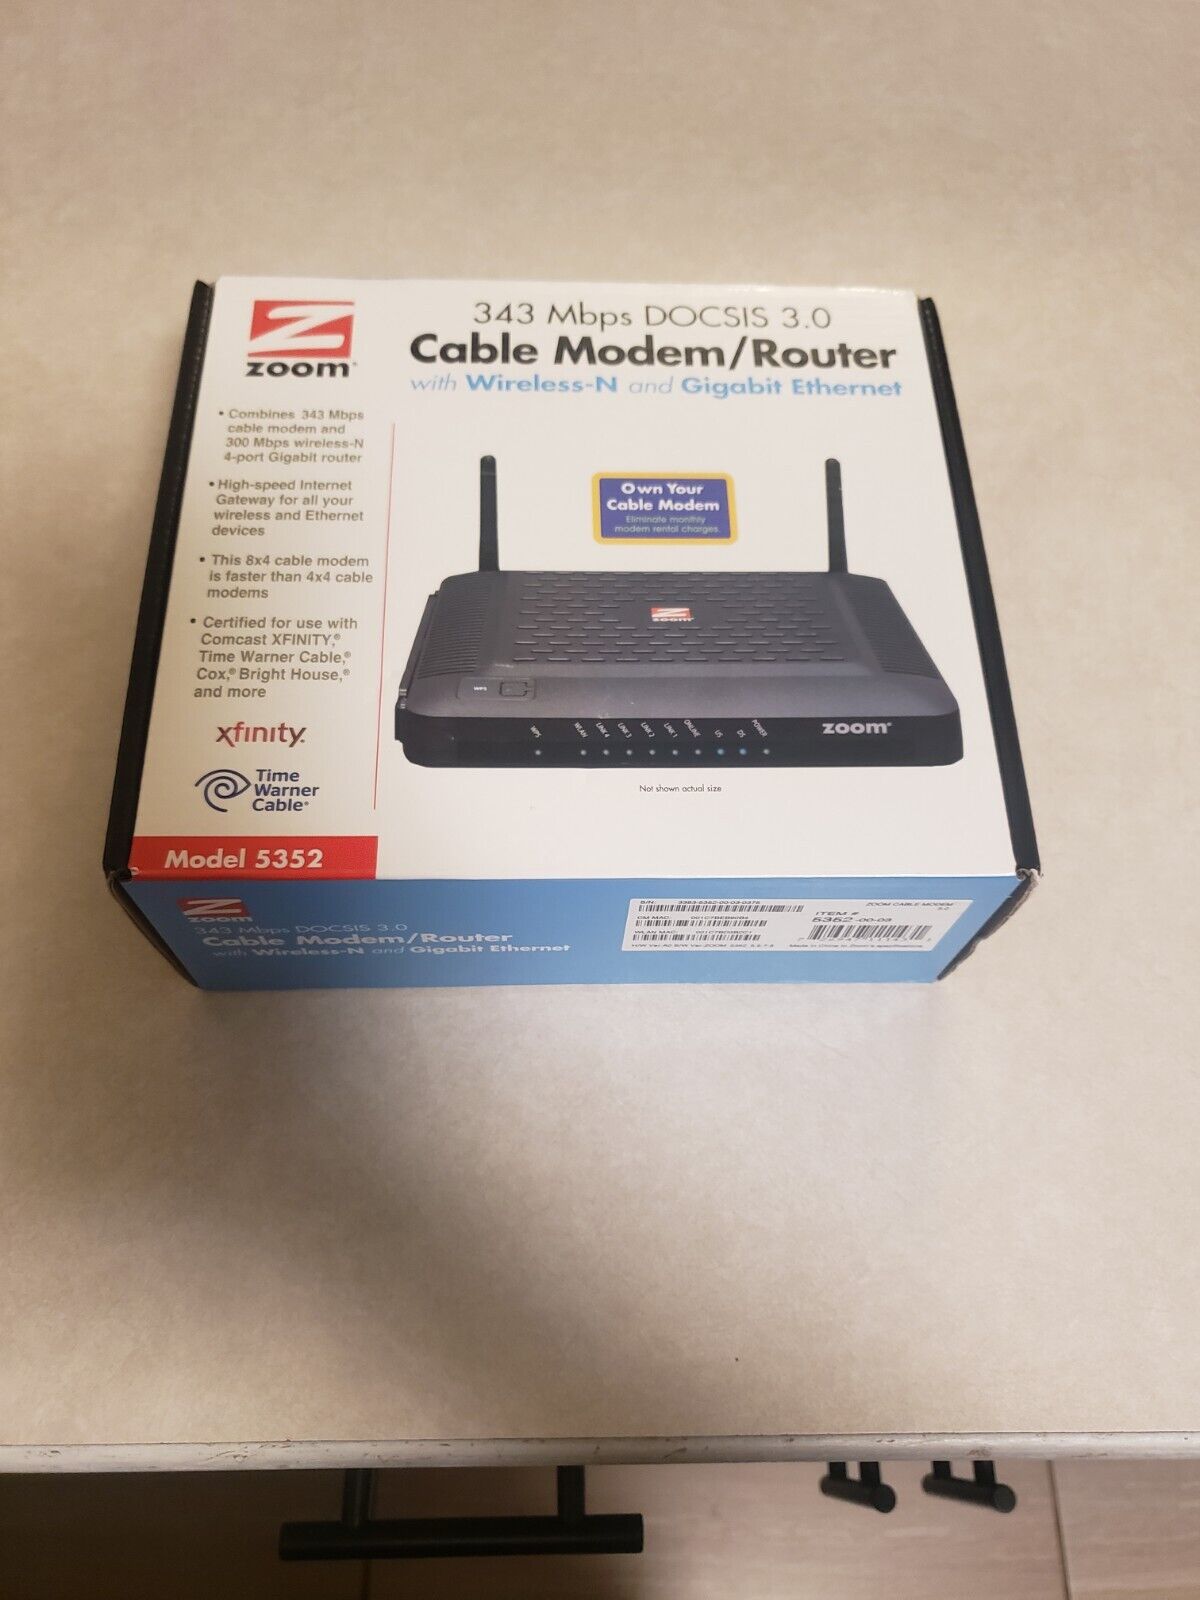 Zoom DOCSIS 3.0 Cable Modem/Router with Wireless-N Model 5352 